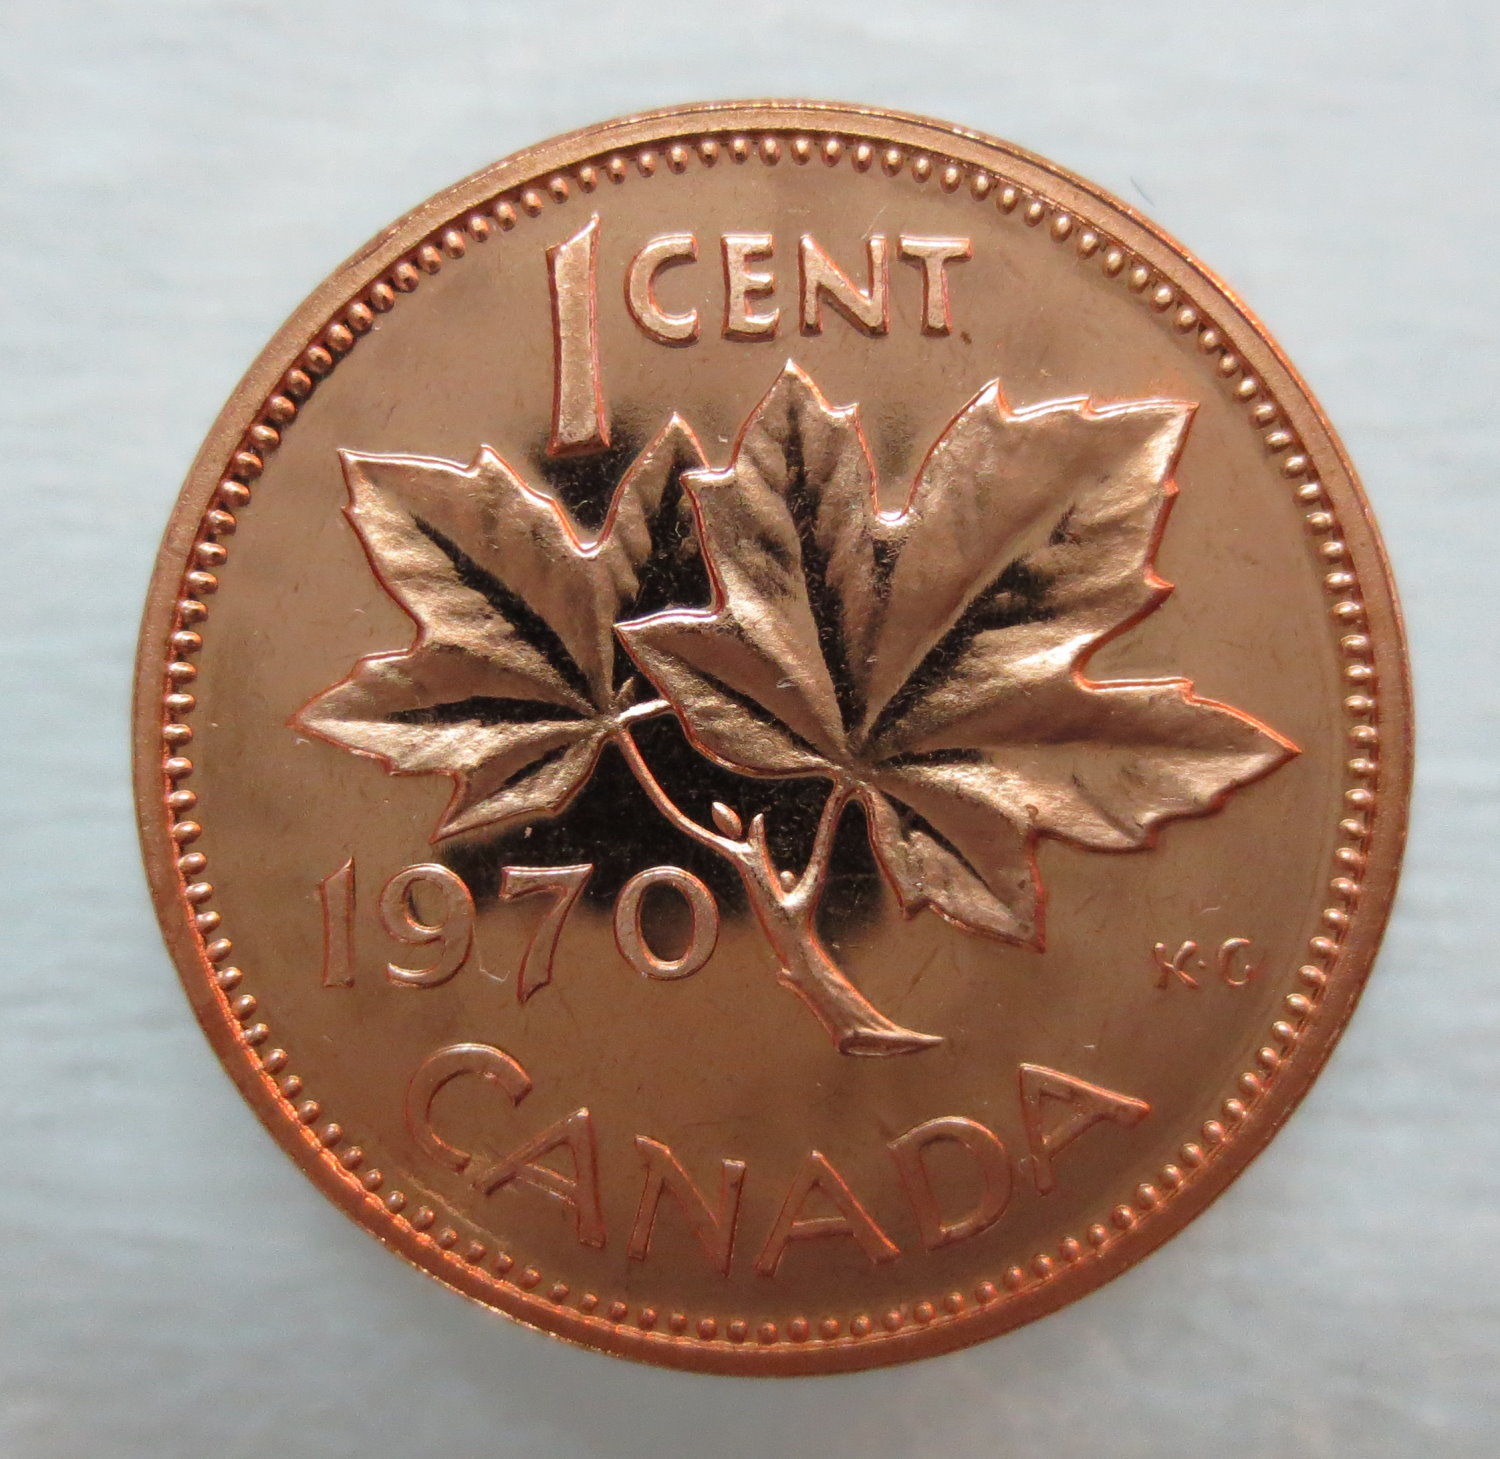 1970 CANADA 1 CENT PROOF-LIKE PENNY COIN